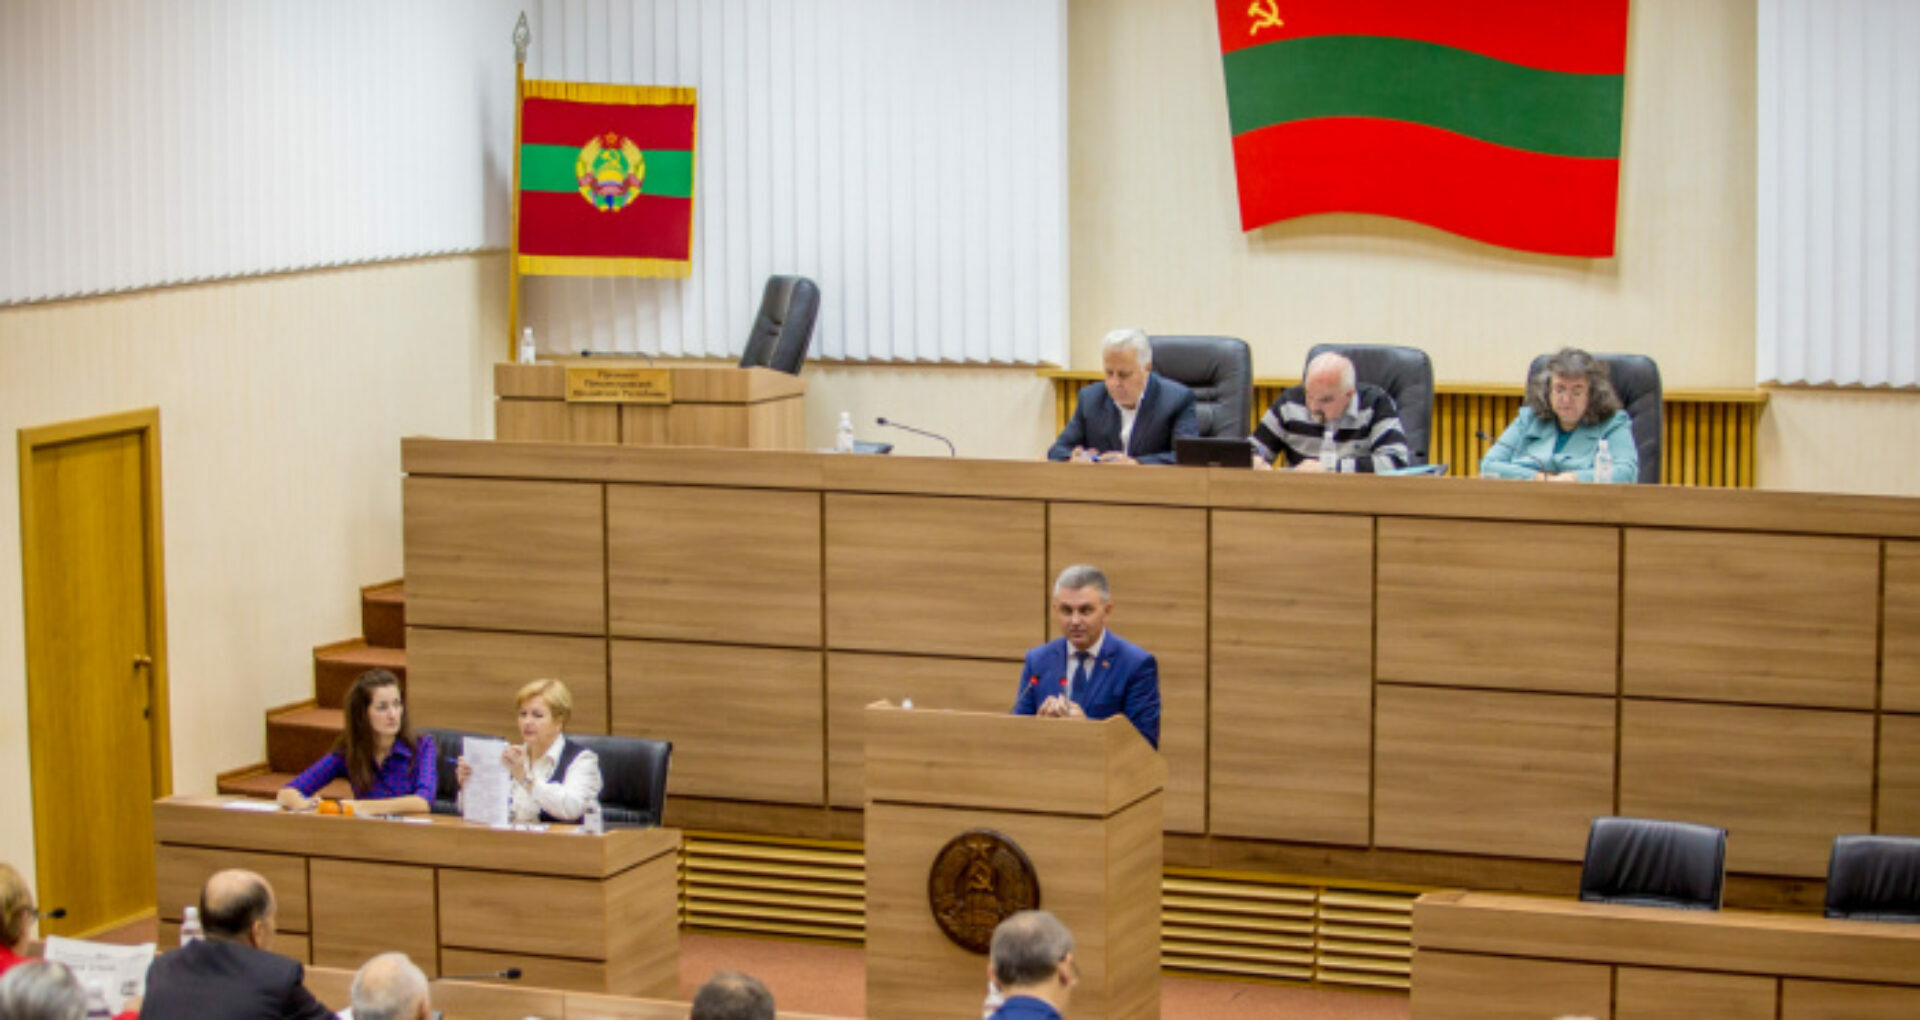 Promo-Lex Report Finds that the Russian Authorities Continue to Influence the Events in Breakaway Transnistria Region